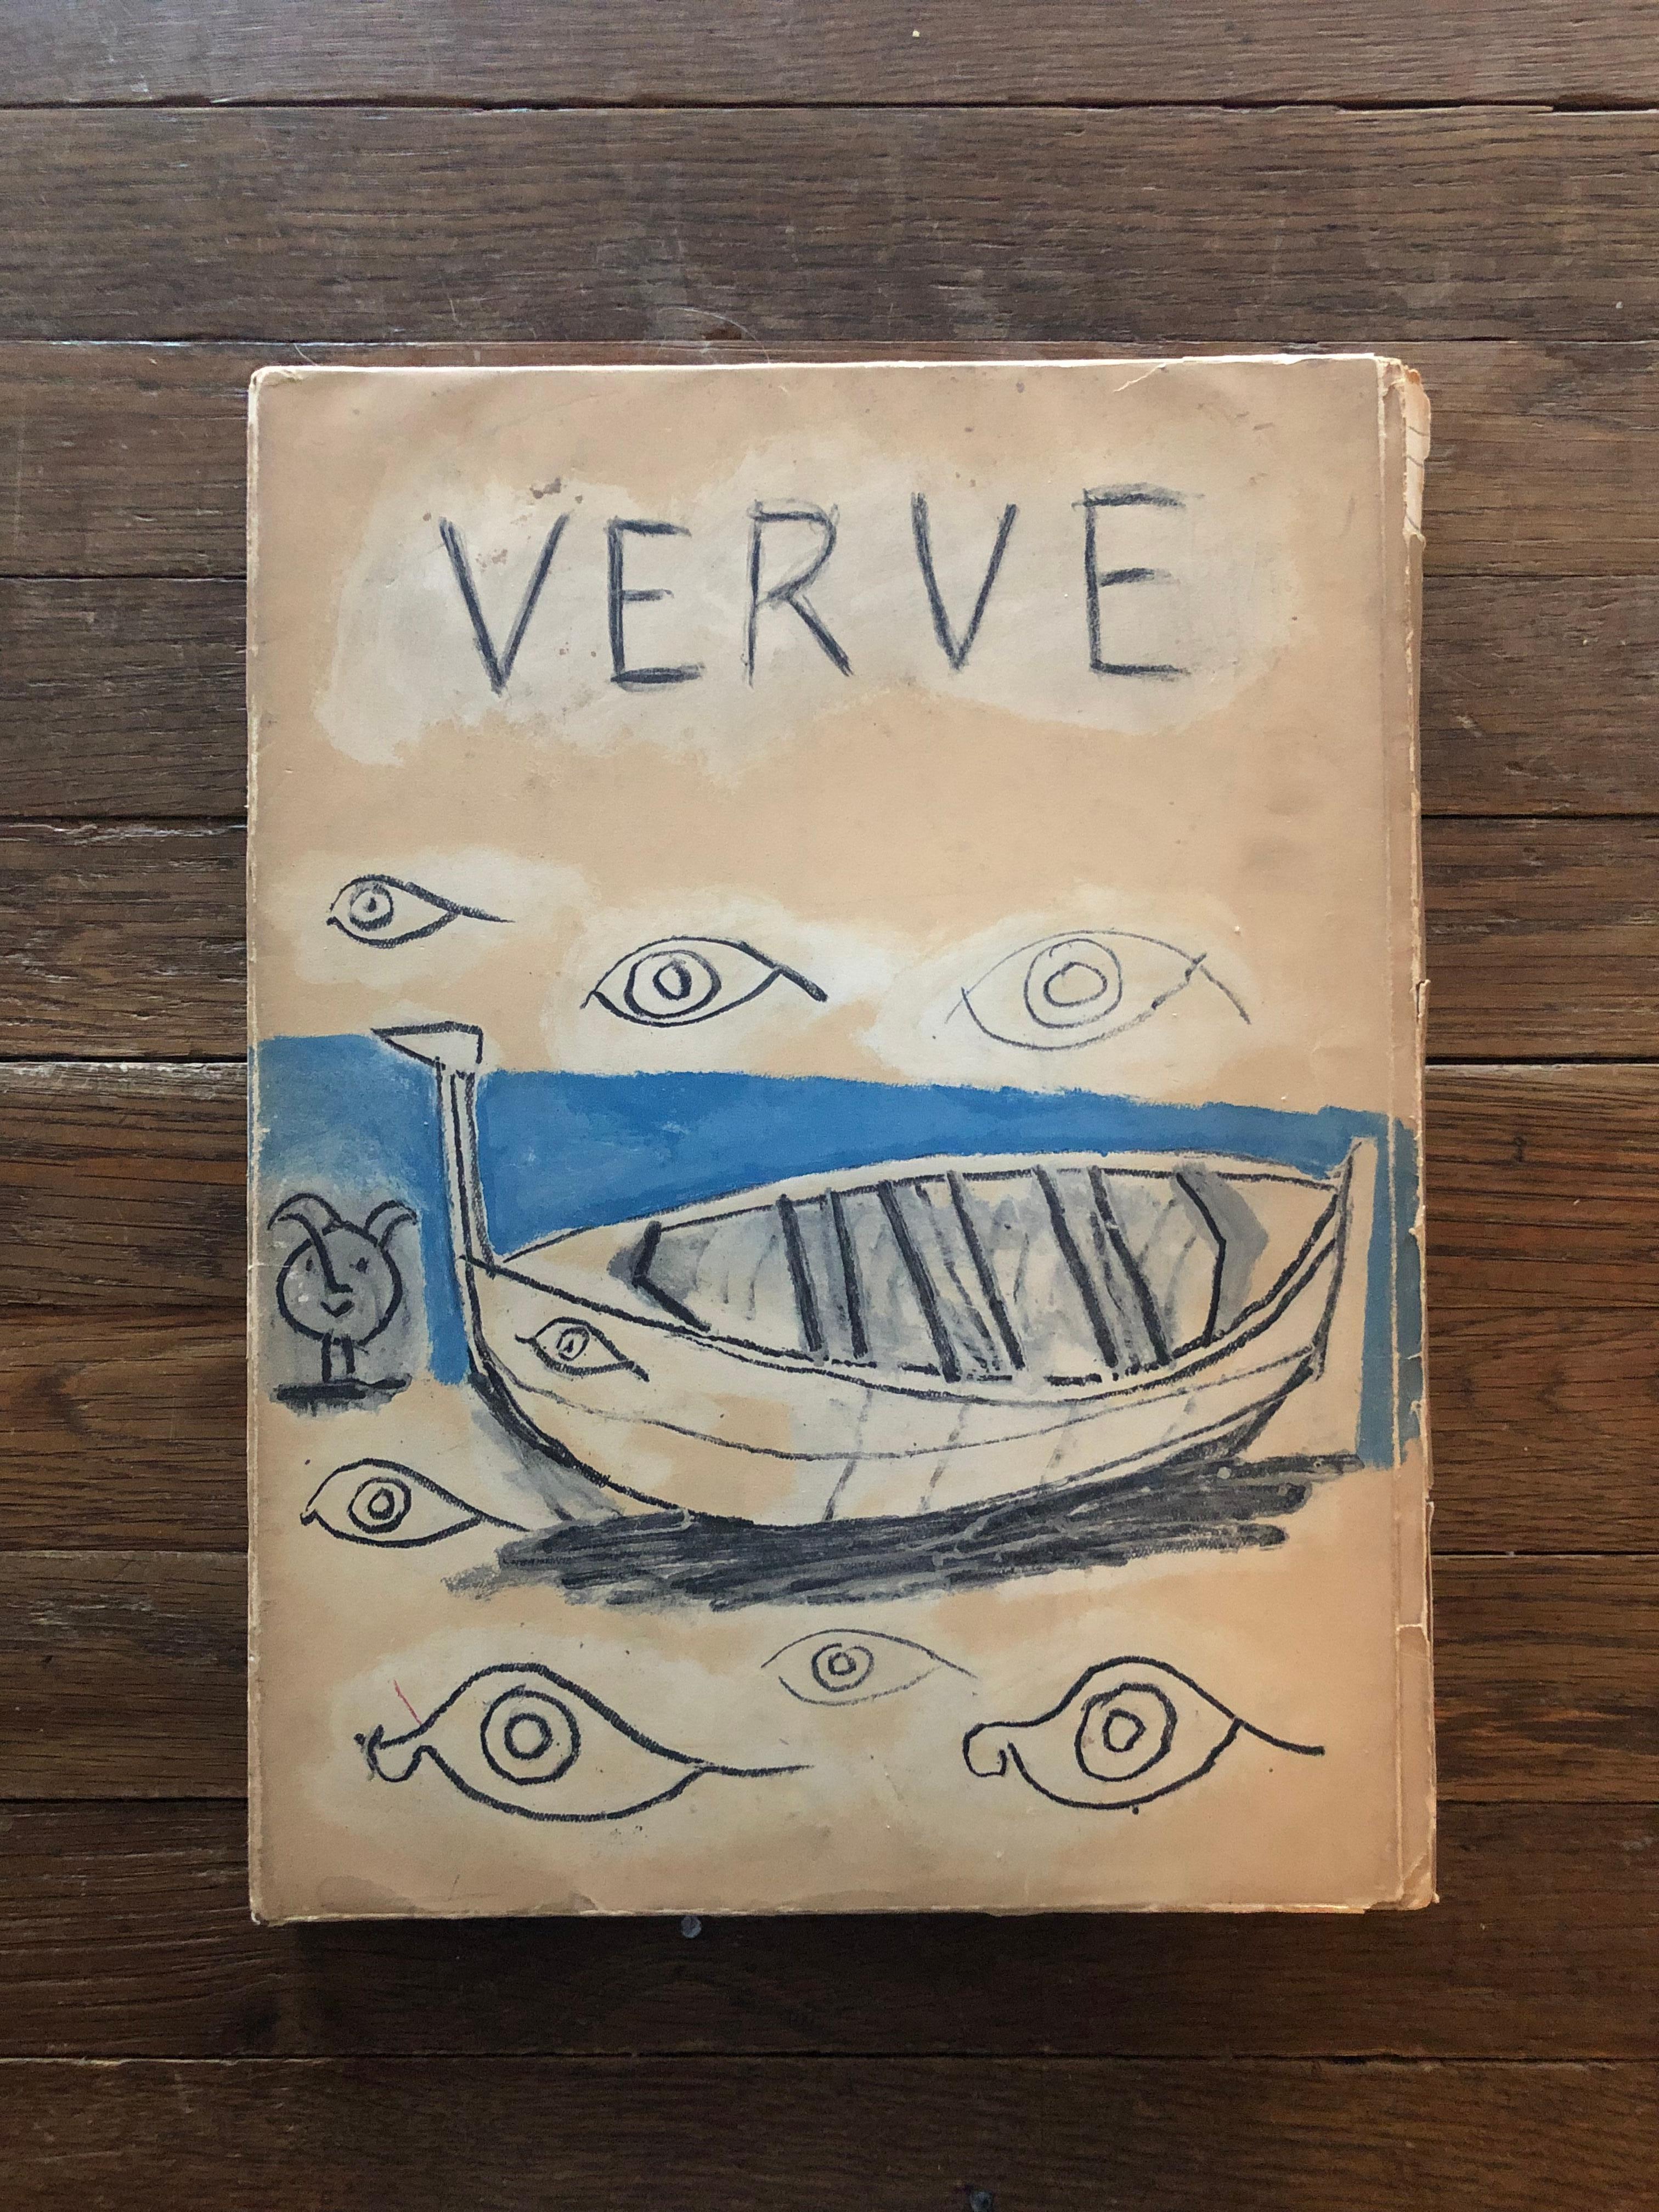 Verve 19/20
Published 1948

A double issue, containing 